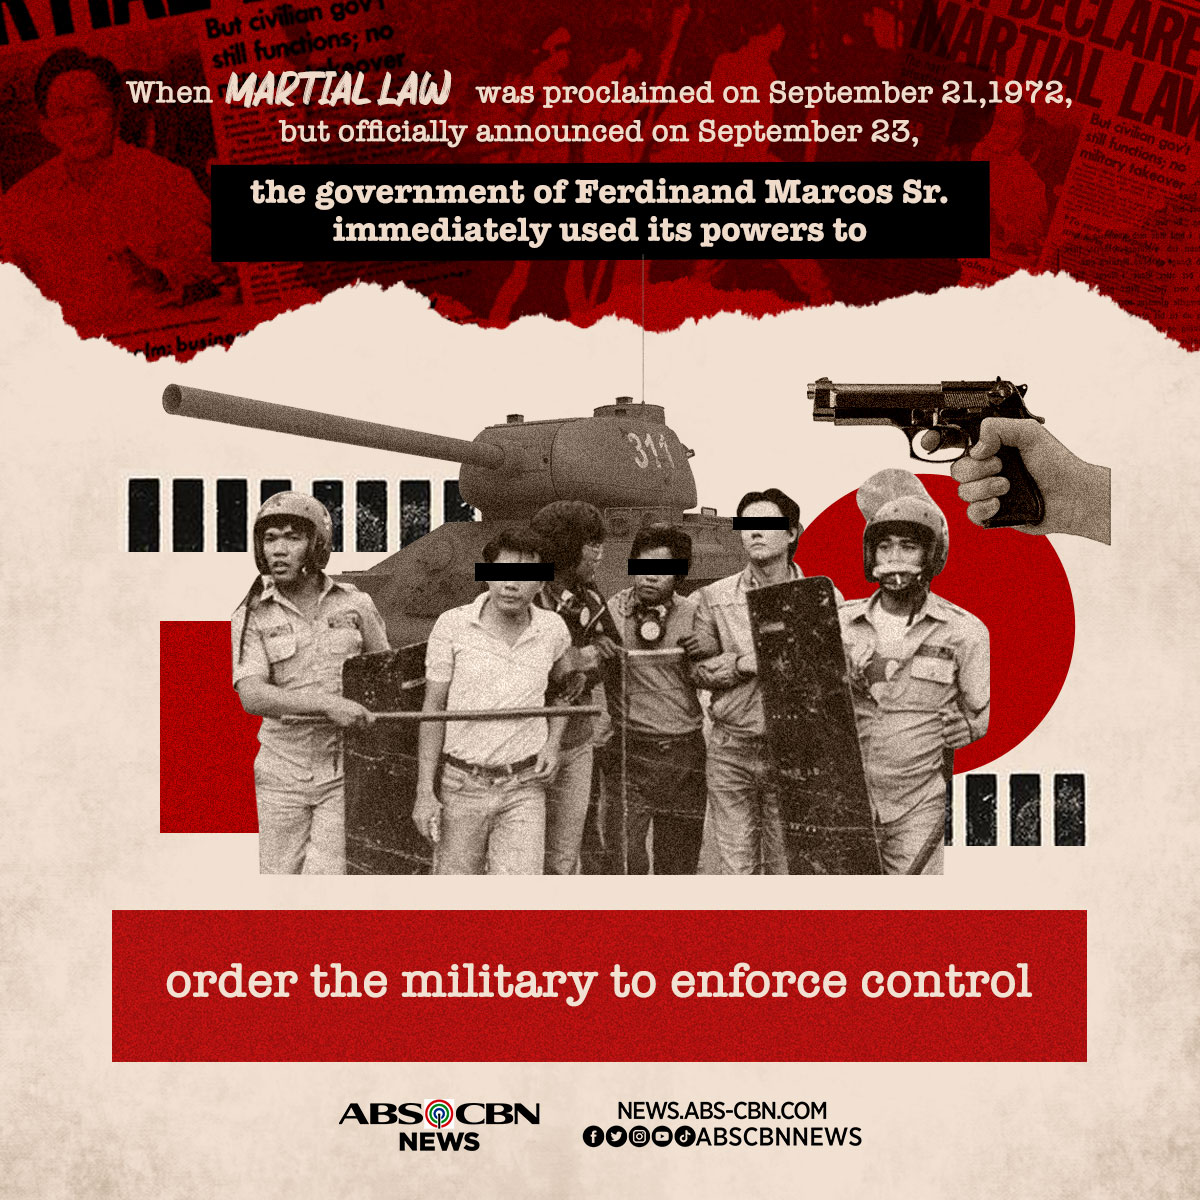 What happened immediately after Martial Law was declared in 1972? 5